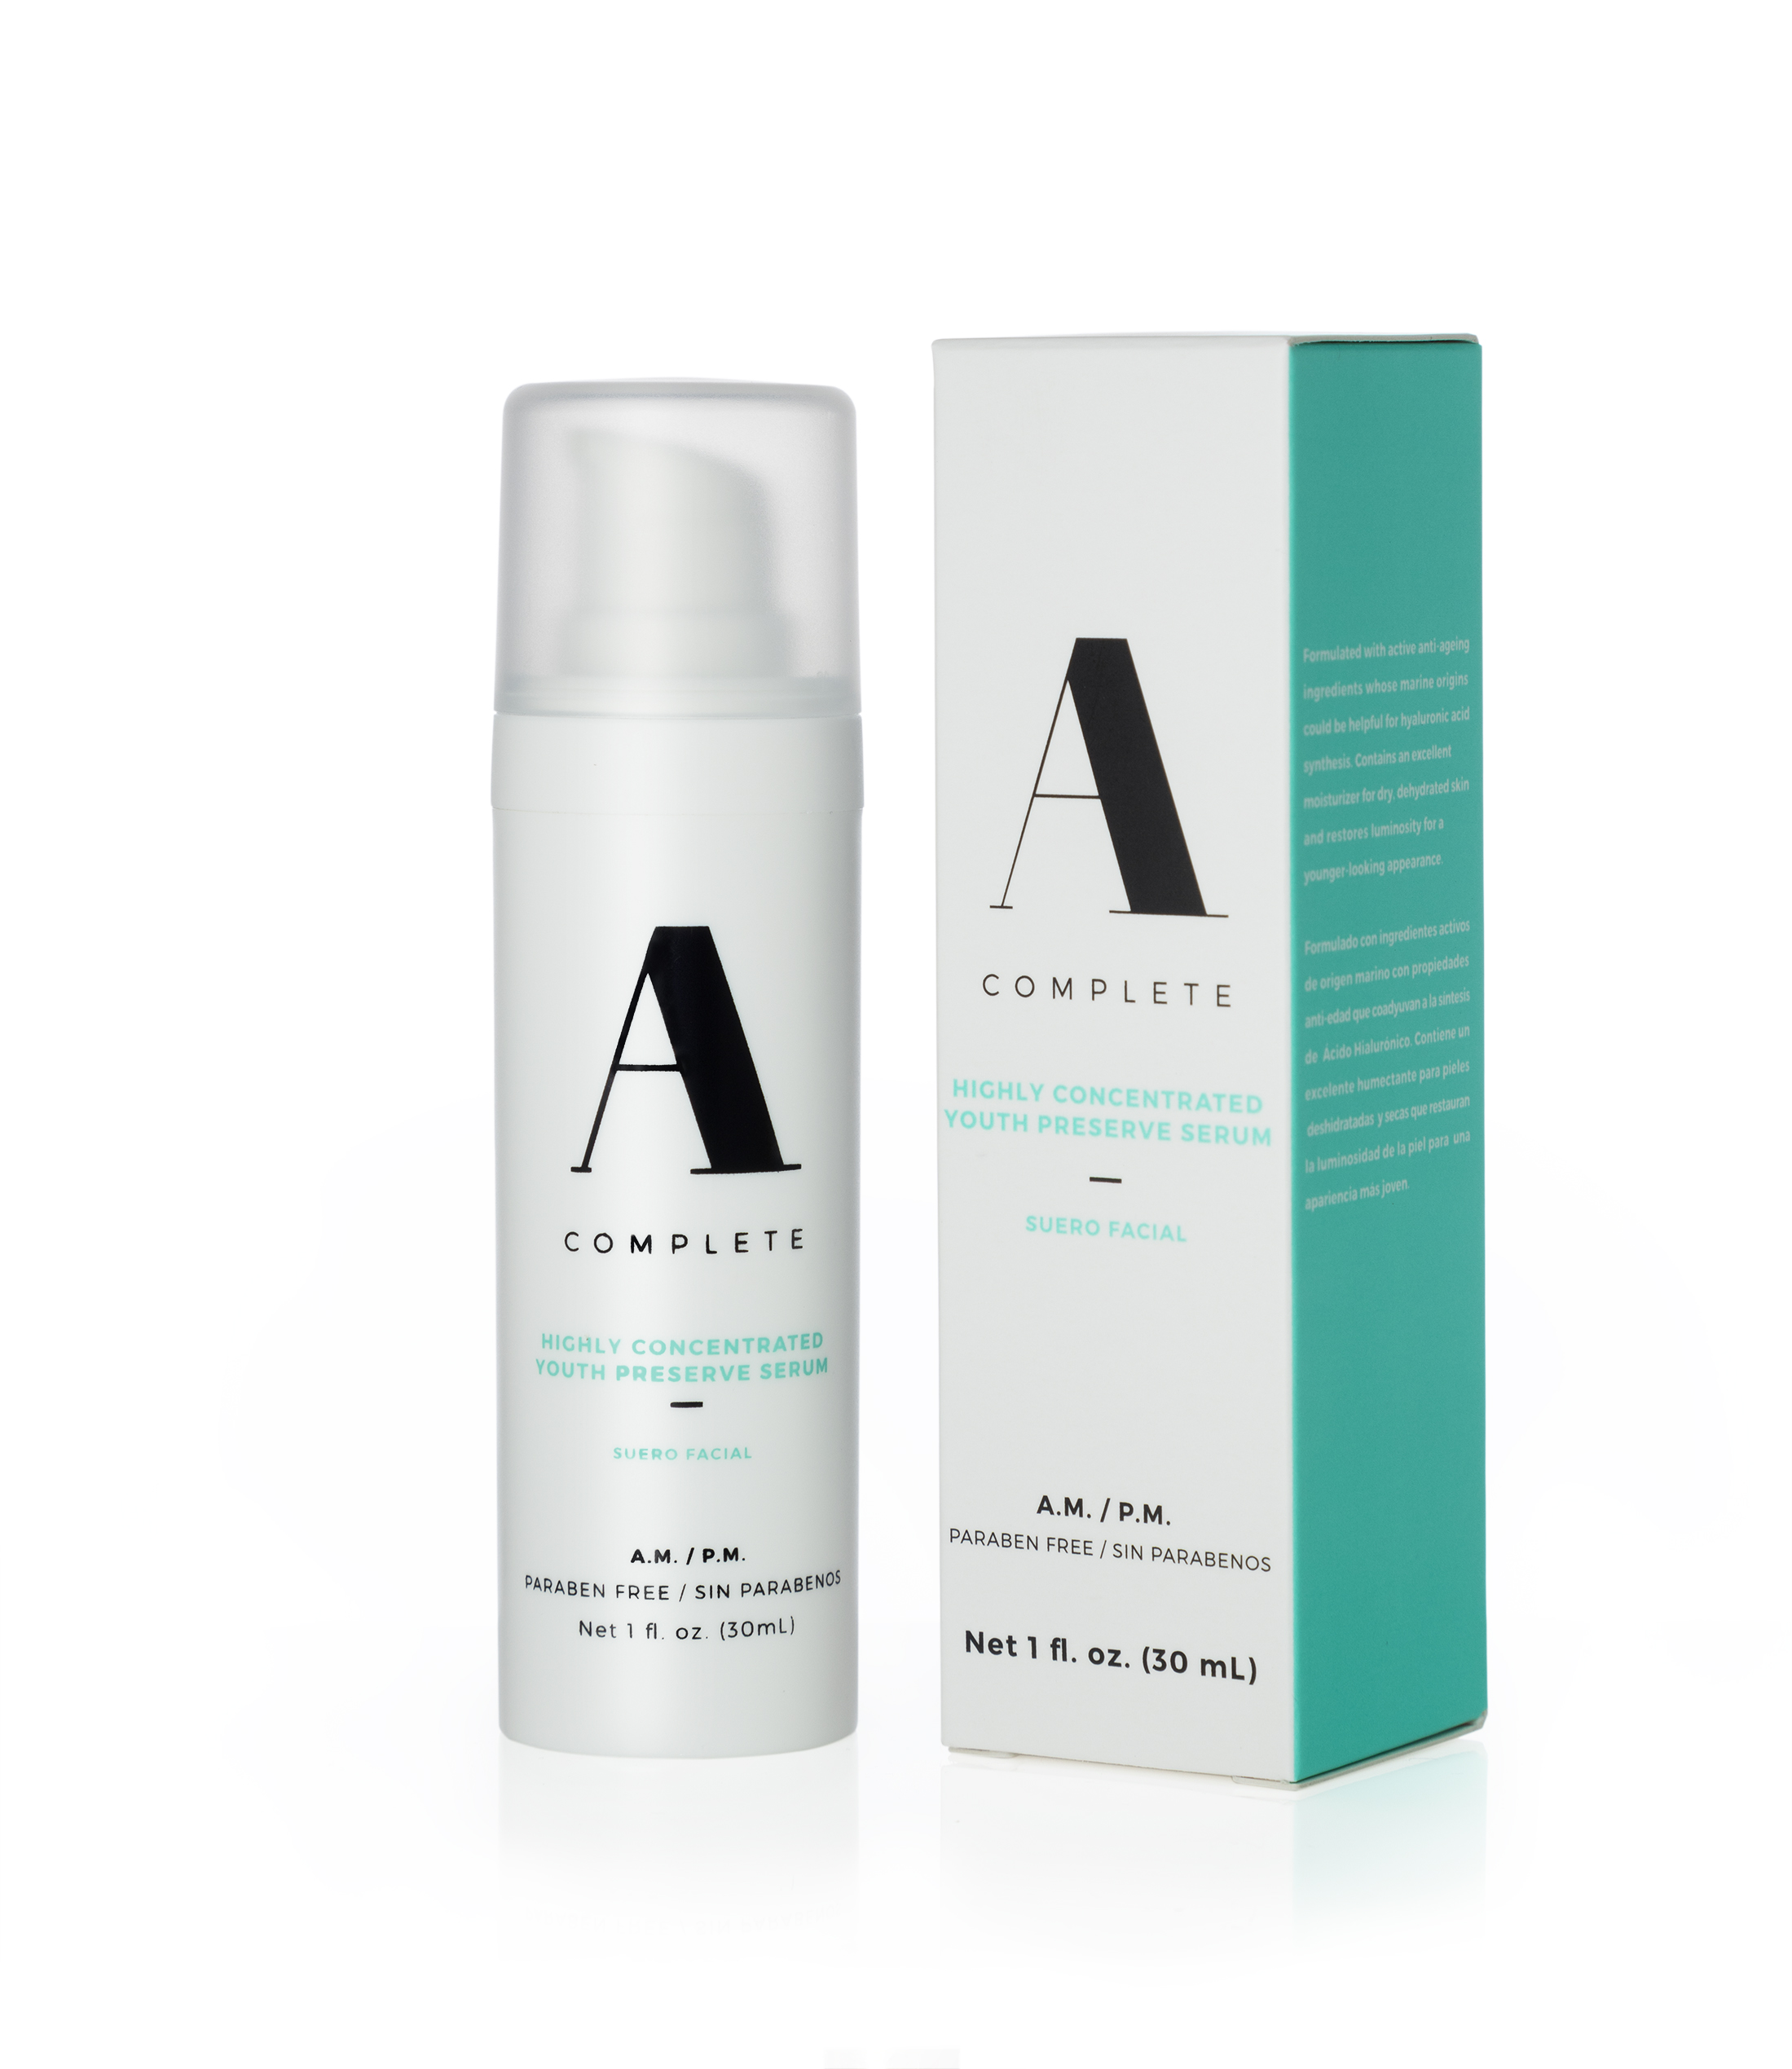 A Complete Youth Preserve Serum